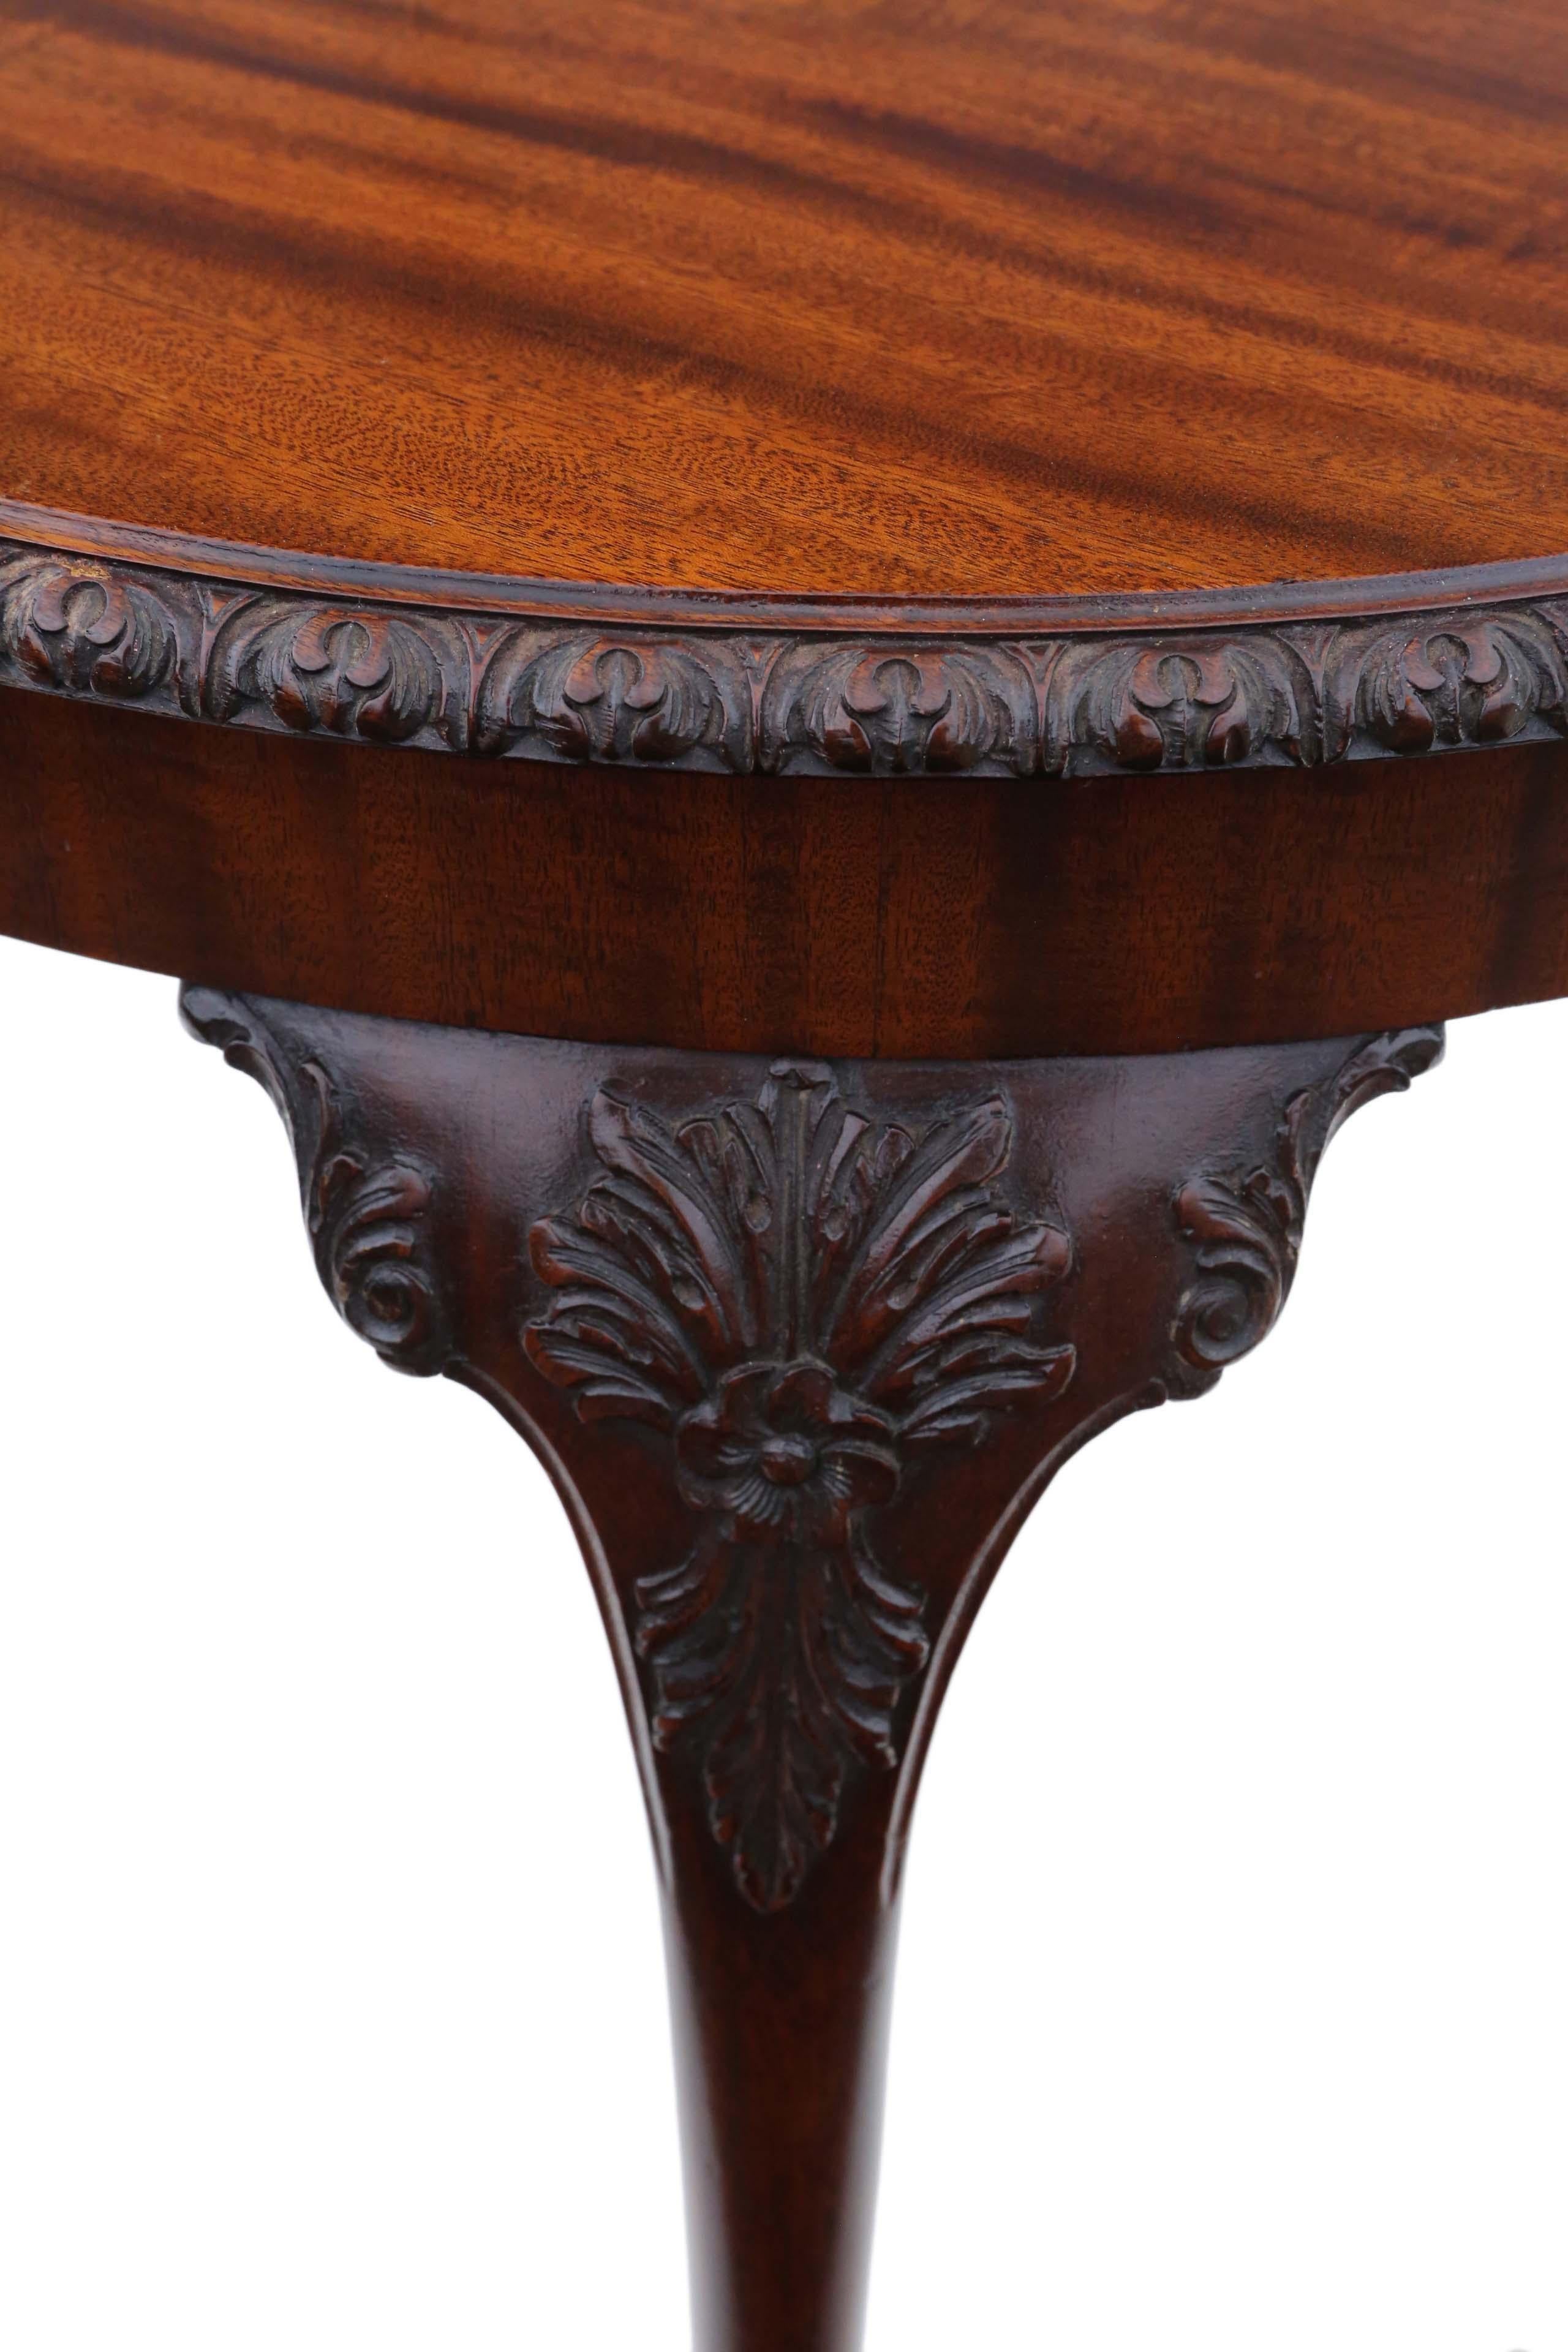 Antique Carved Mahogany Circular Table Occasional Side Centre Window In Good Condition For Sale In Wisbech, Cambridgeshire